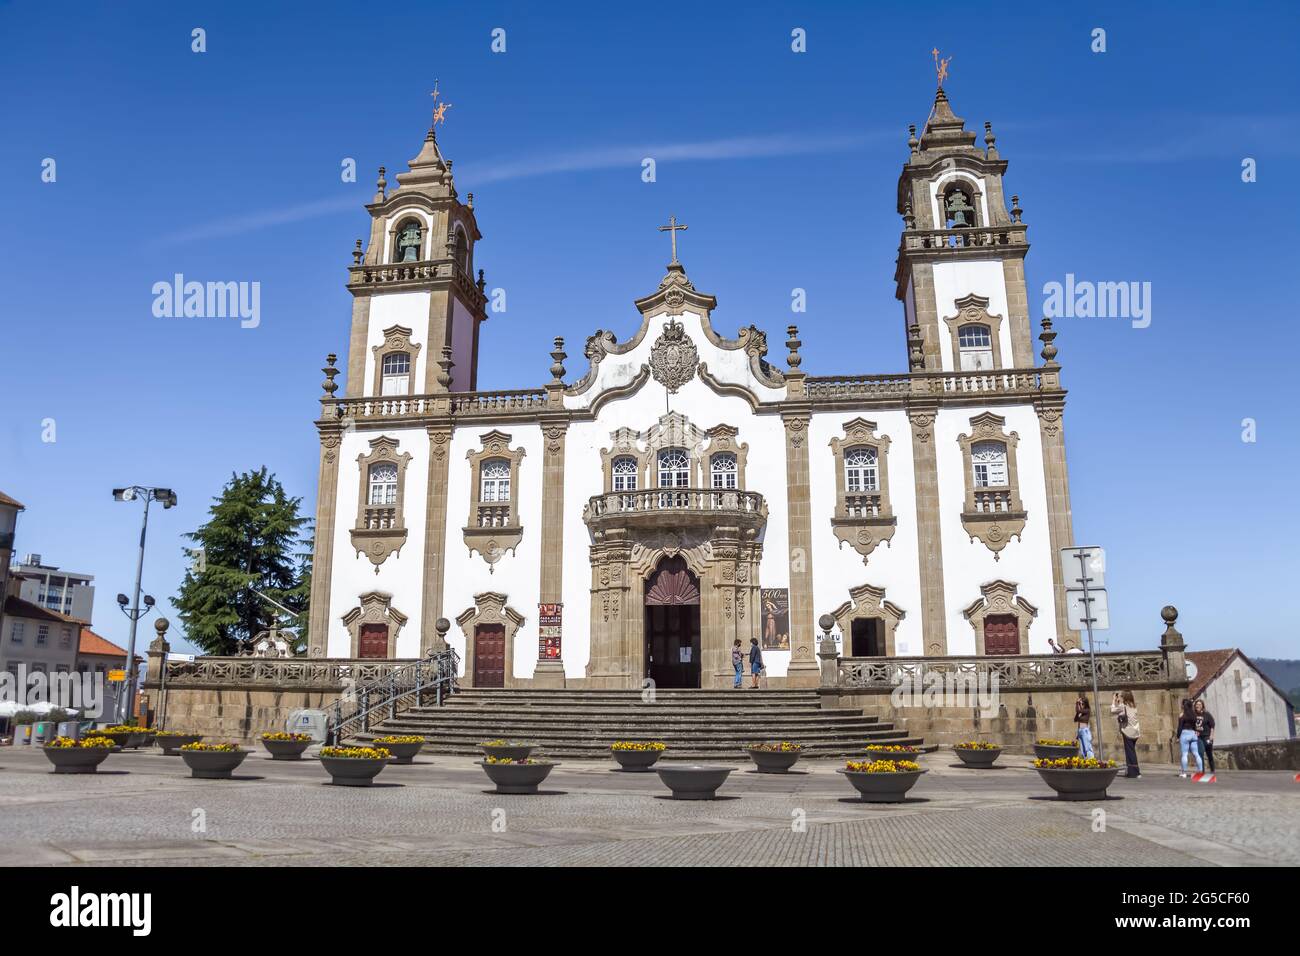 Viseu / Portugal - 05/08/2021 : View at the front facade of Church of Mercy, baroque style monument, architectural icon of the city of Viseu, in Portu Stock Photo